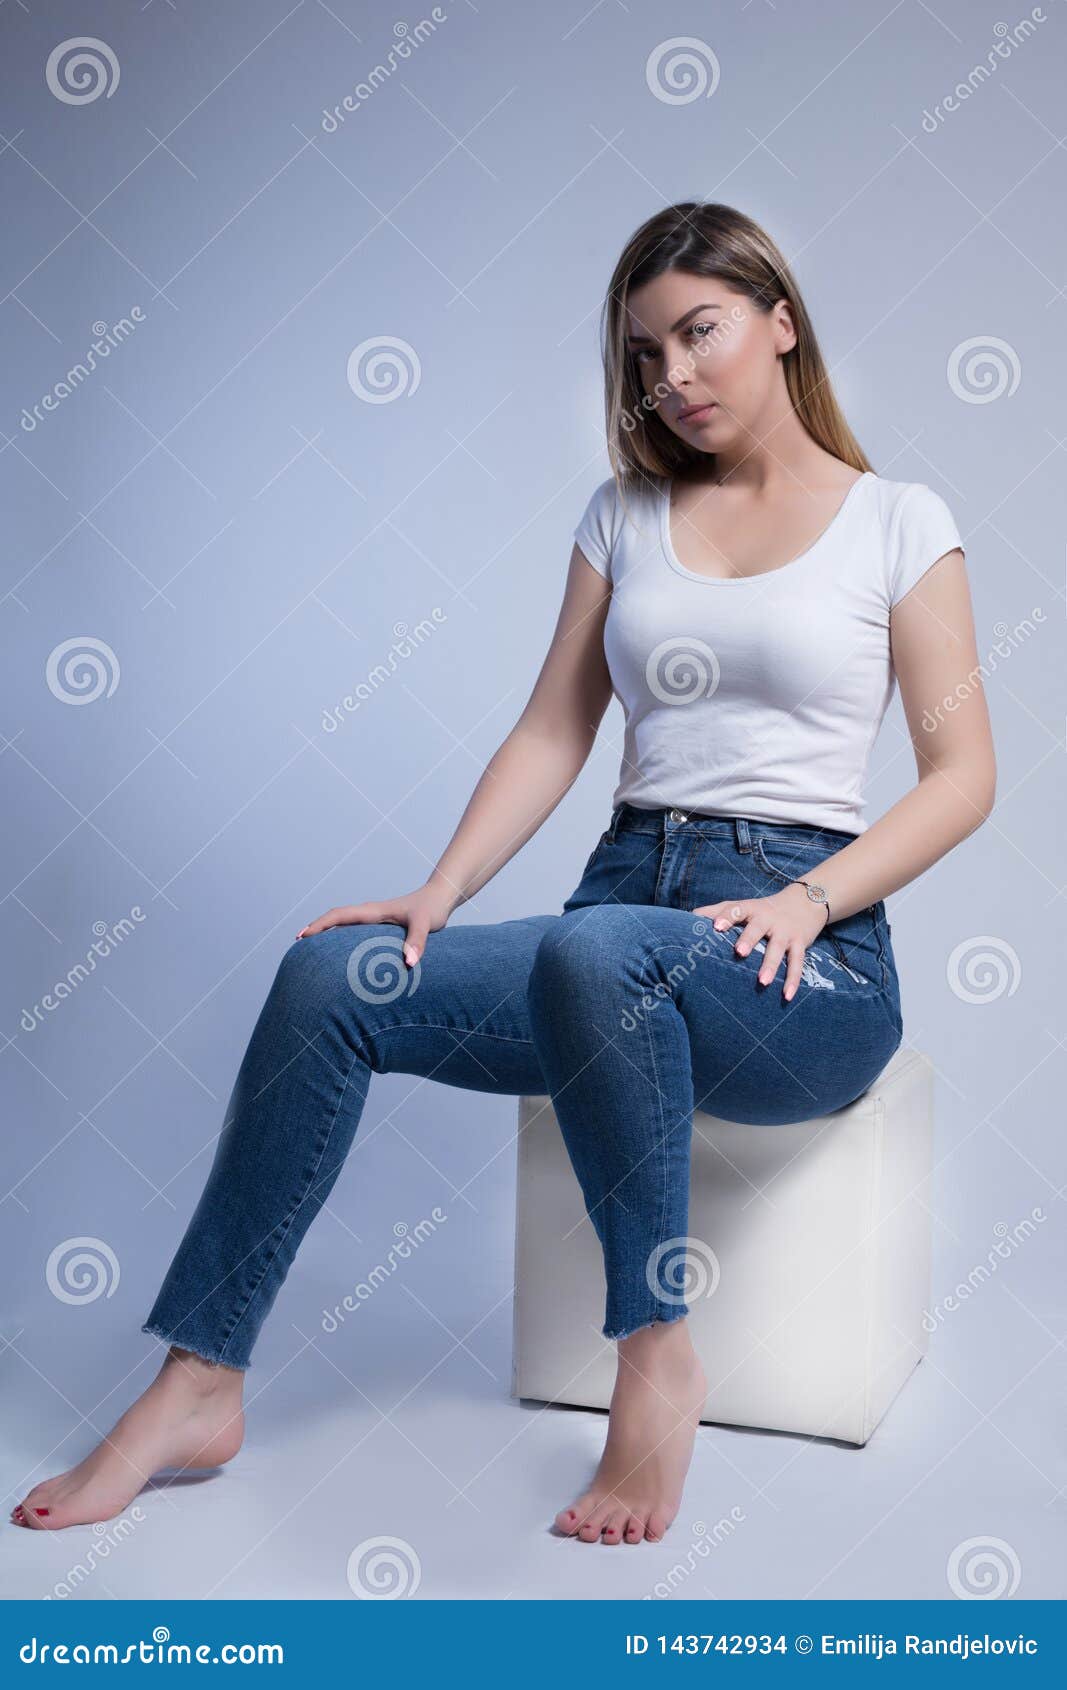 Jeans and feet